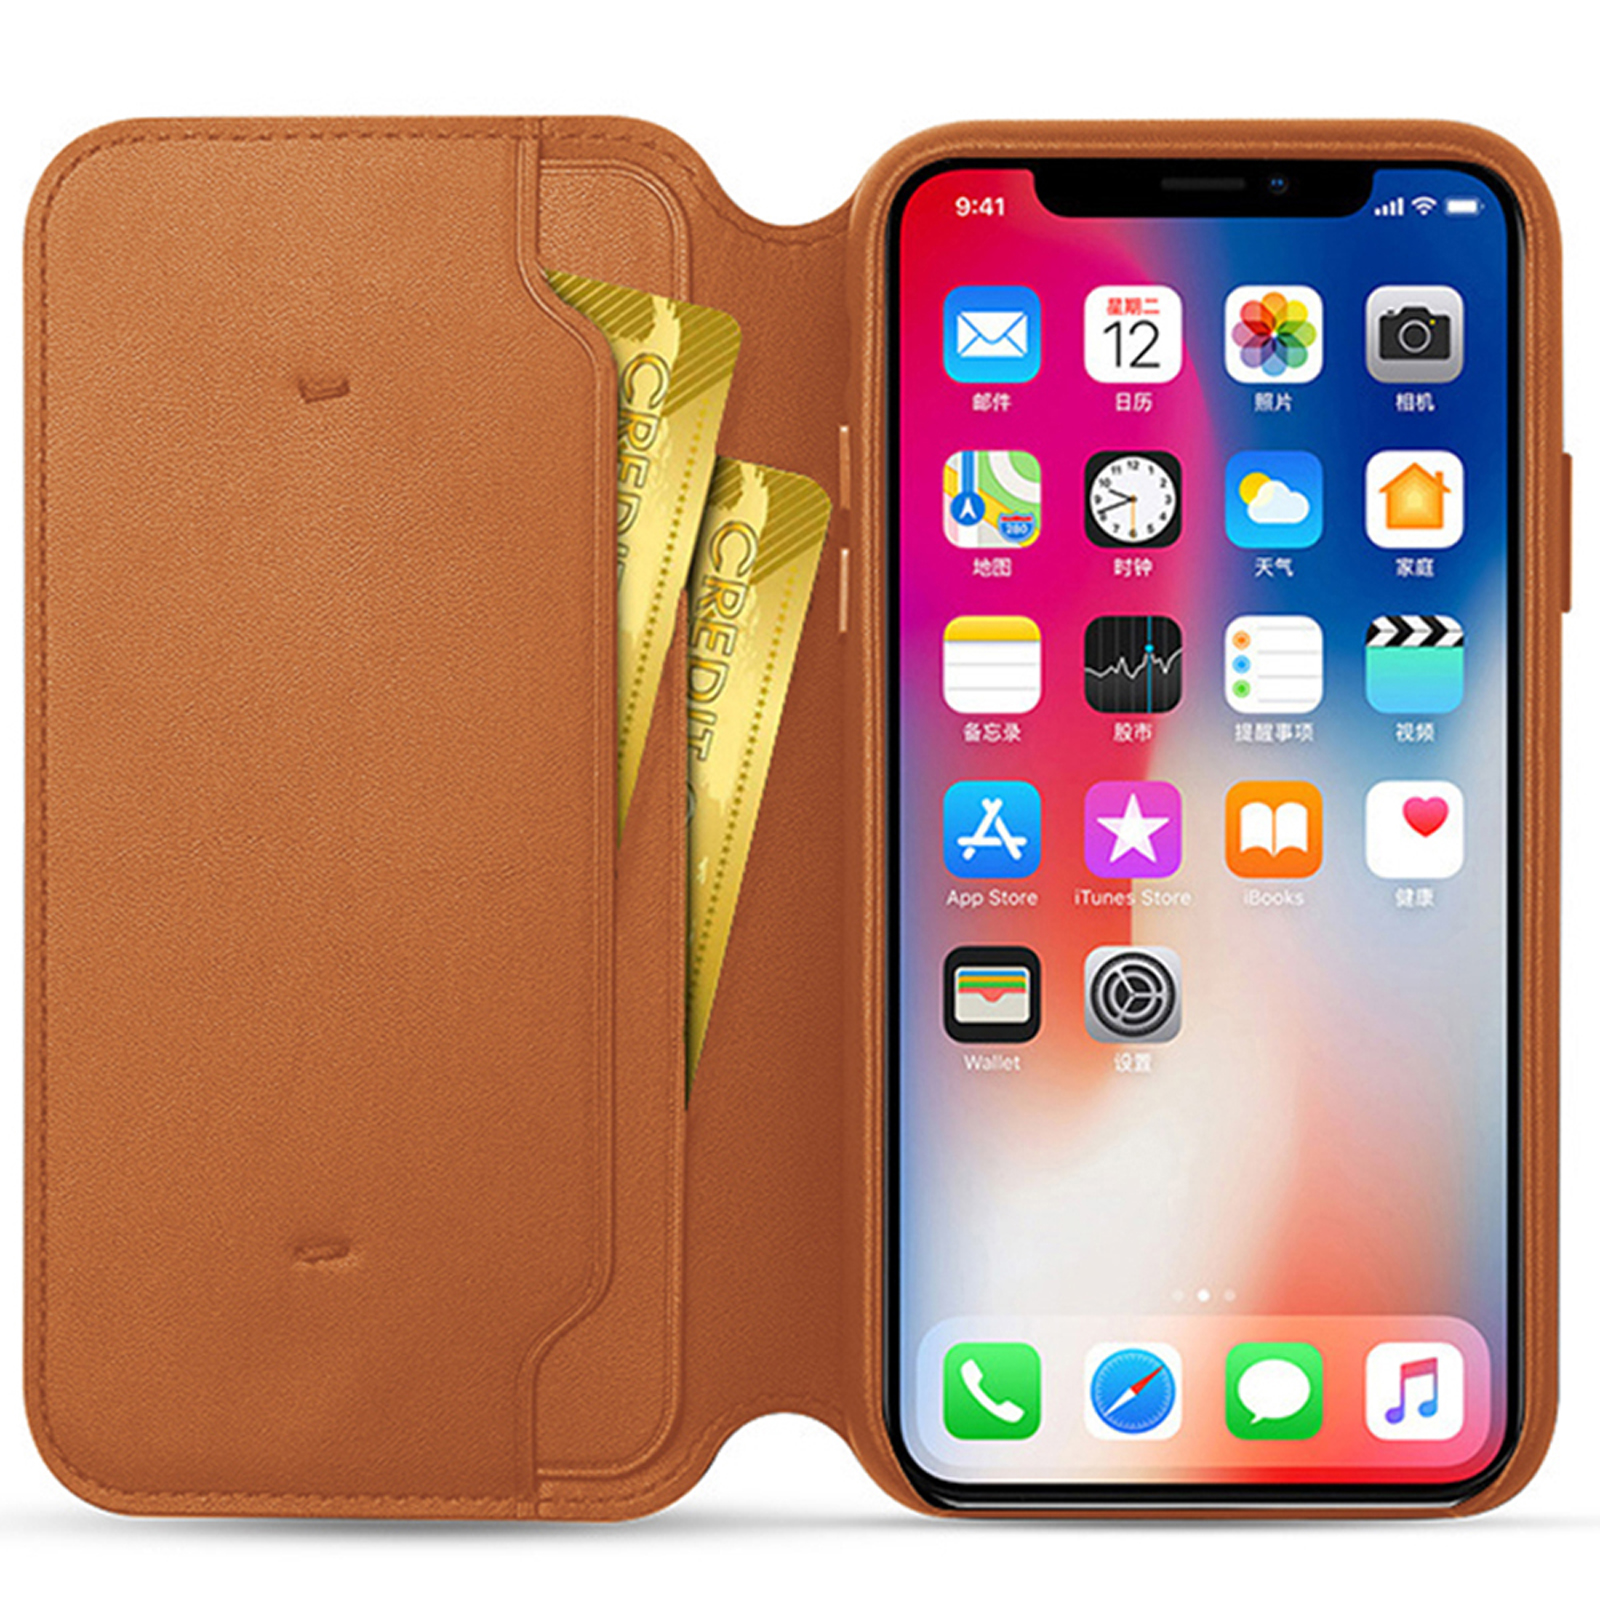 New Leather Flip Wallet Folio Phone Case Cover For Apple iPhone 11 Pro Max Xs XR | eBay